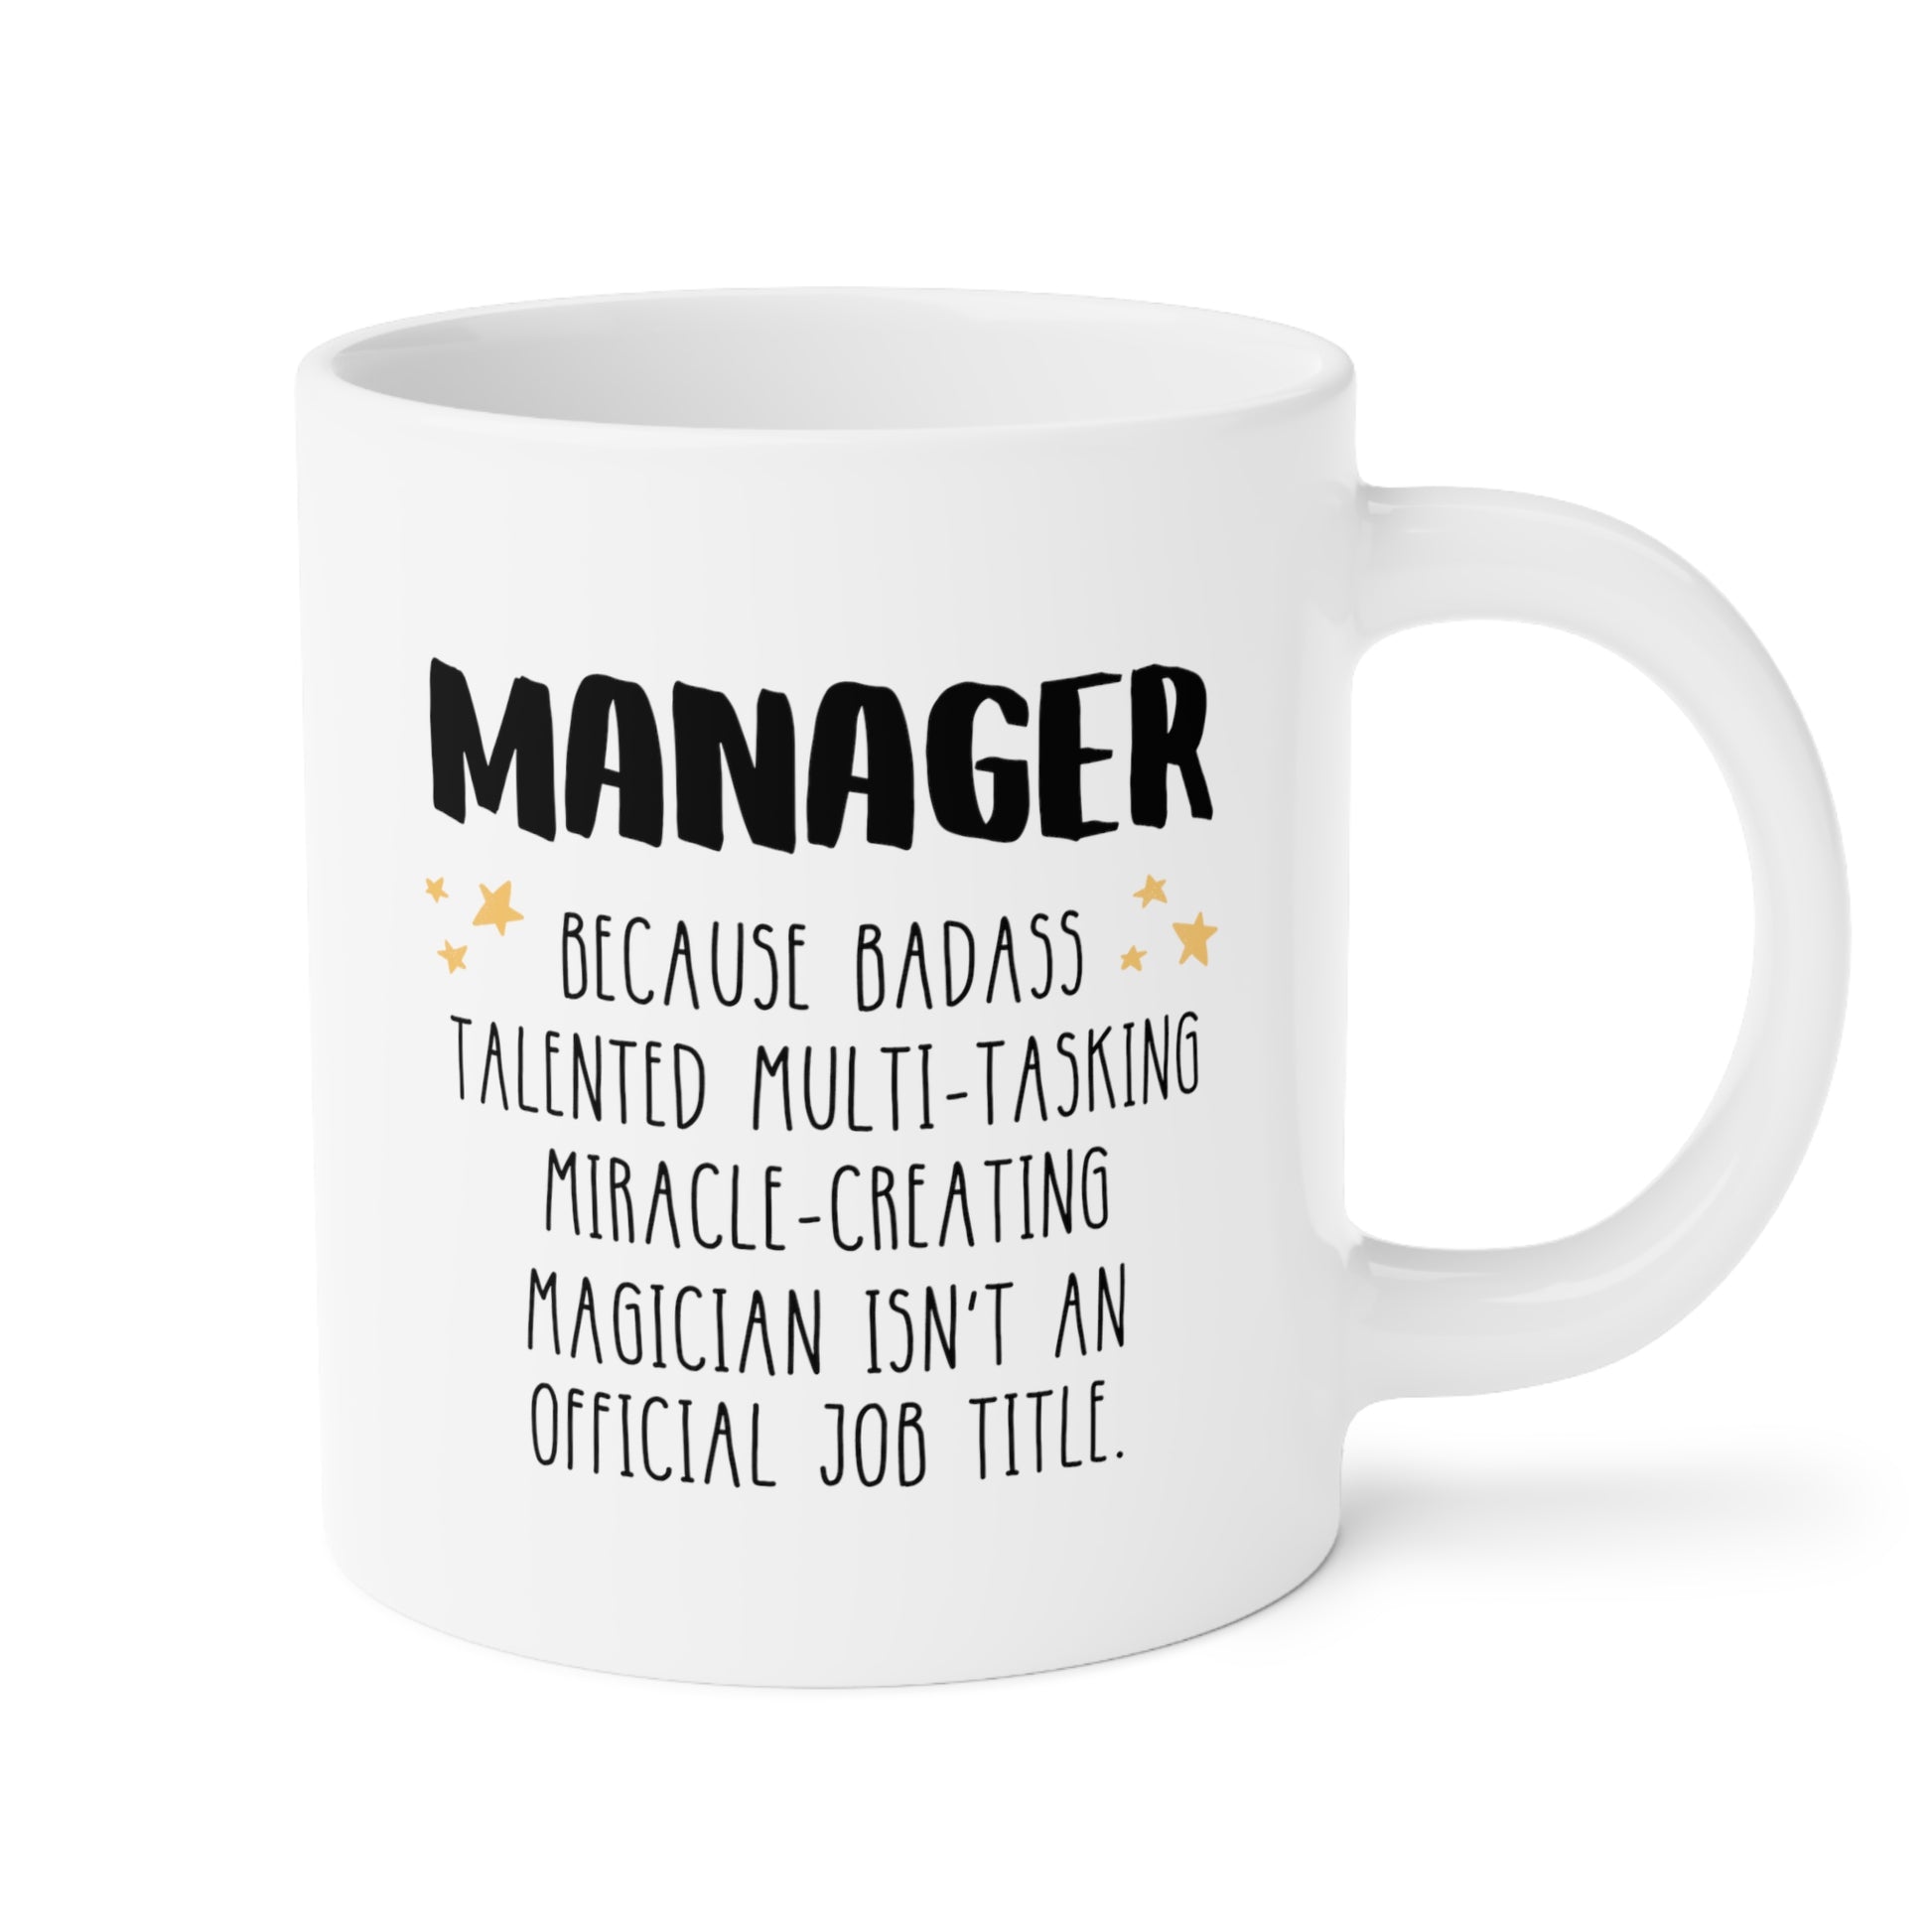 Manager Because Badass Talented Multi-tasking Miracle-creating Magician Isnt An Official Job Title 20oz white funny large coffee mug gift for office waveywares wavey wares wavywares wavy wares